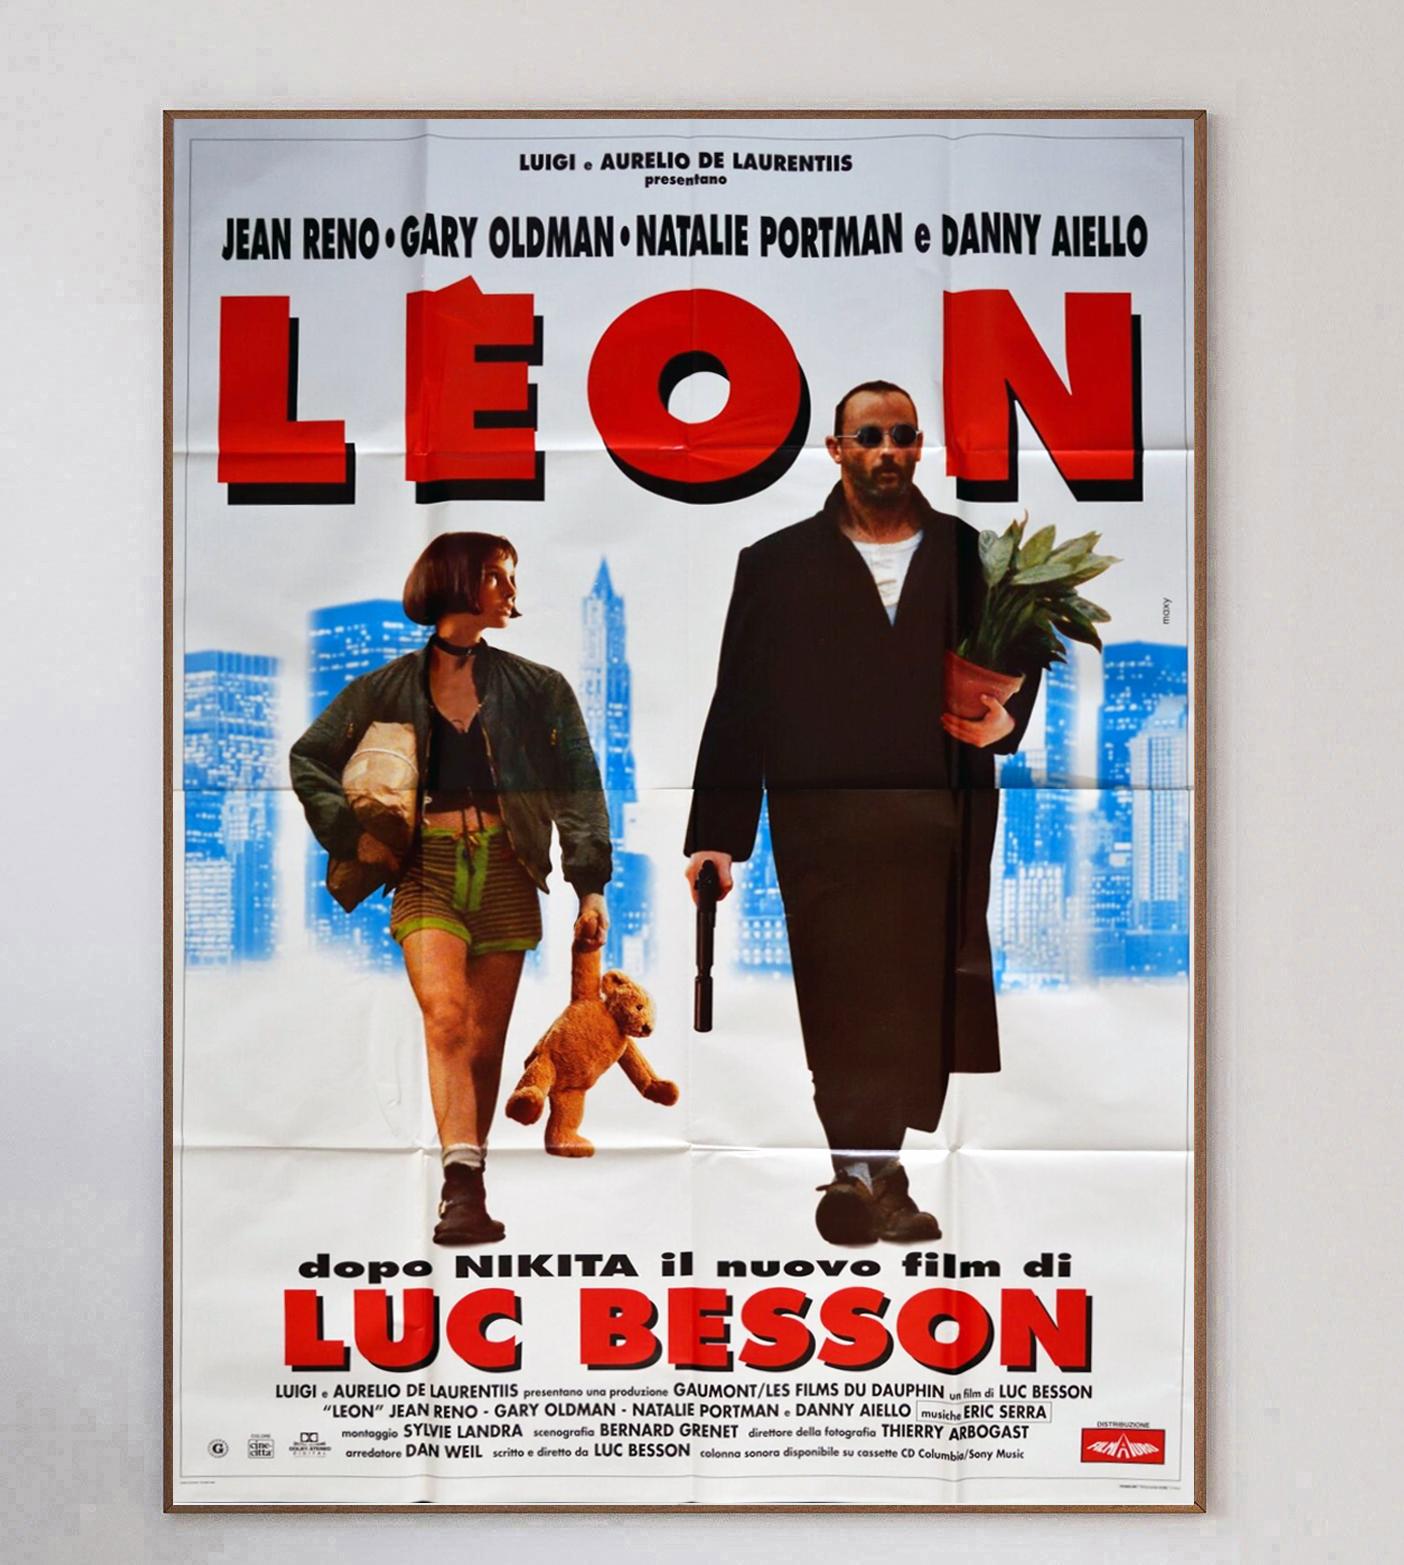 Luc Besson's 1994 classic follows the unlikely friendship between Natalie Portman's 12 year old Mathilda and Jean Reno's professional assassin Leon. Featuring a thrilling performance from Gary Oldman, the film - Besson's first American film - has